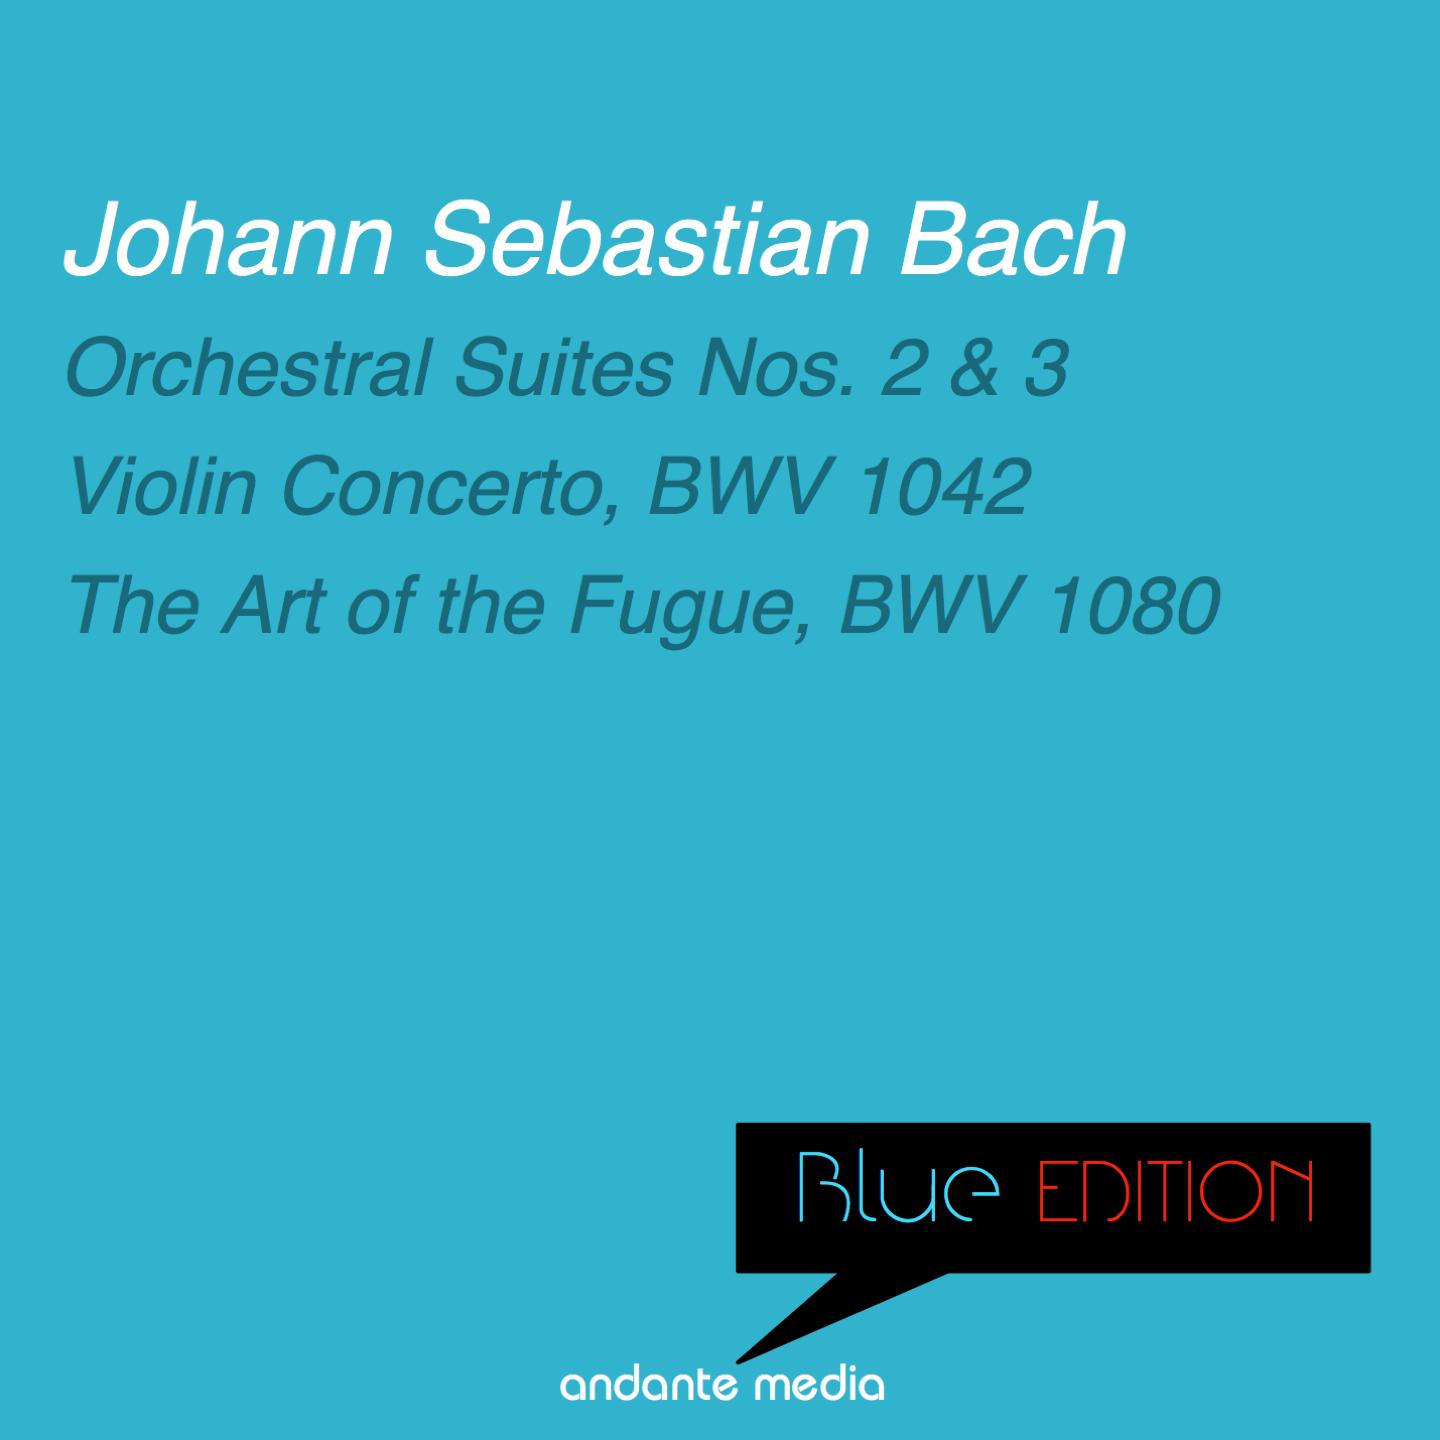 Orchestral Suite No. 3 in D Major, BWV 1068: Air